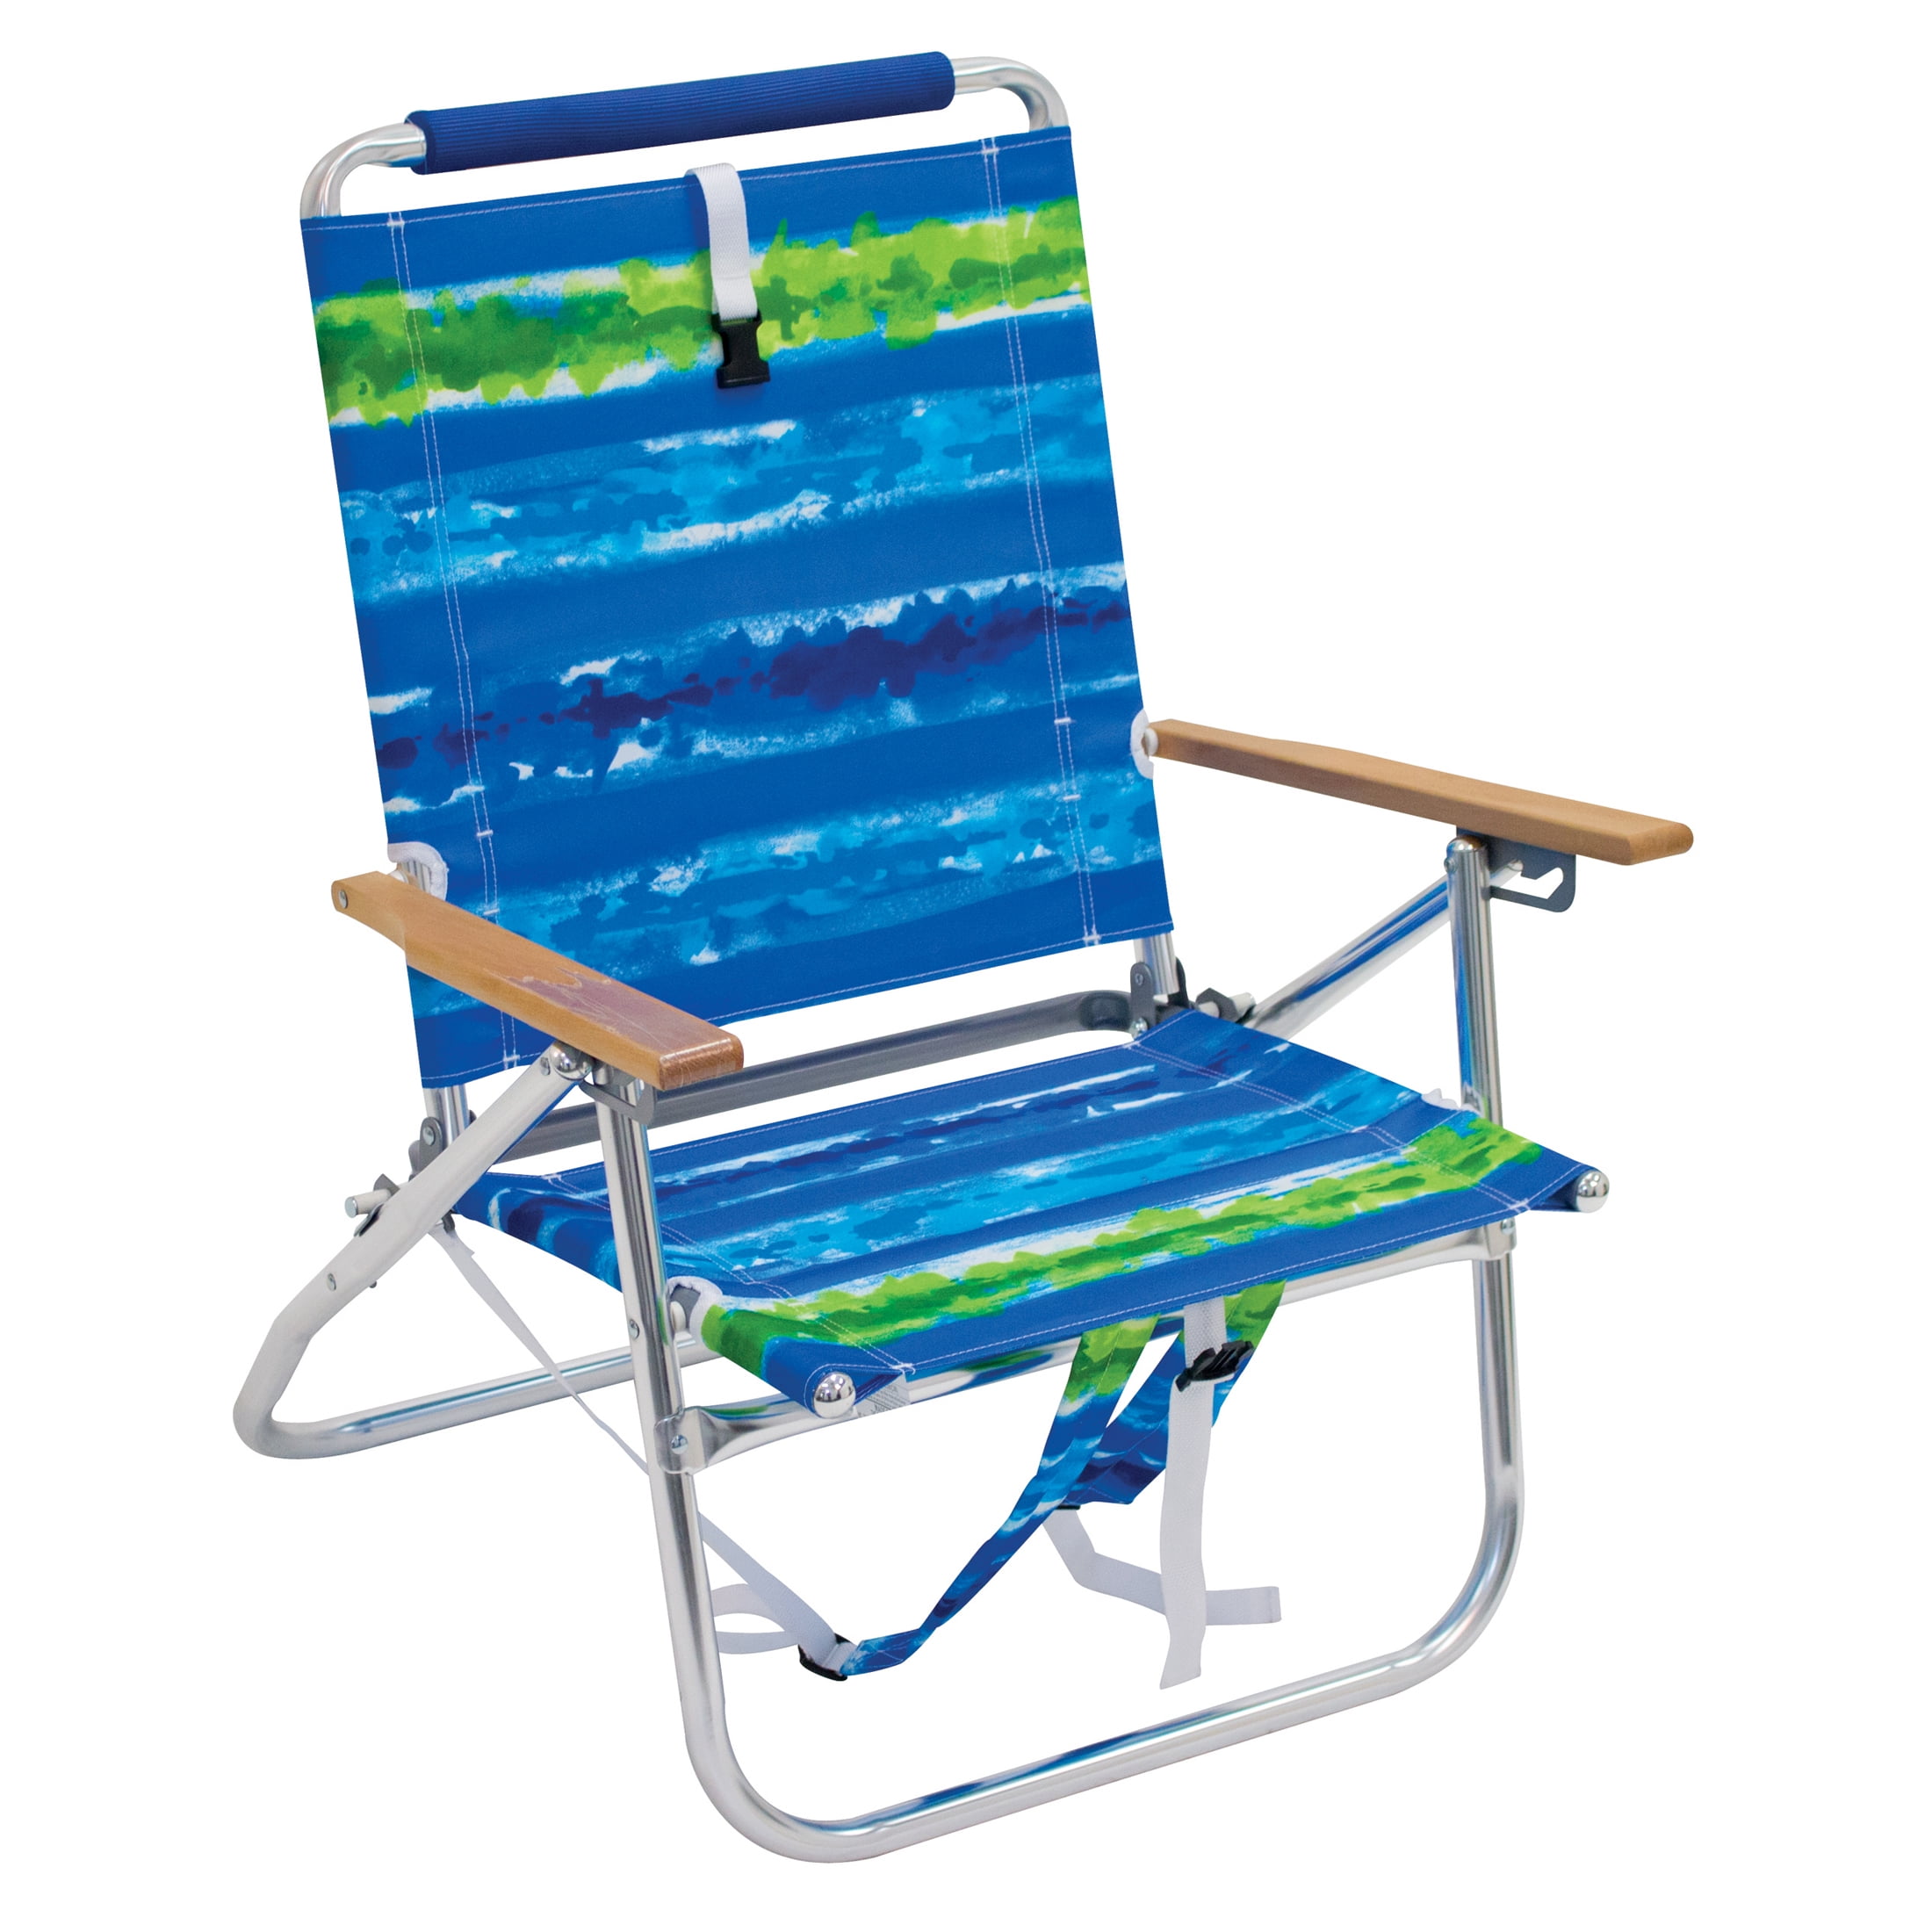 RIO 12" Aluminum 3-Position Removable Backpack Beach Chair ...